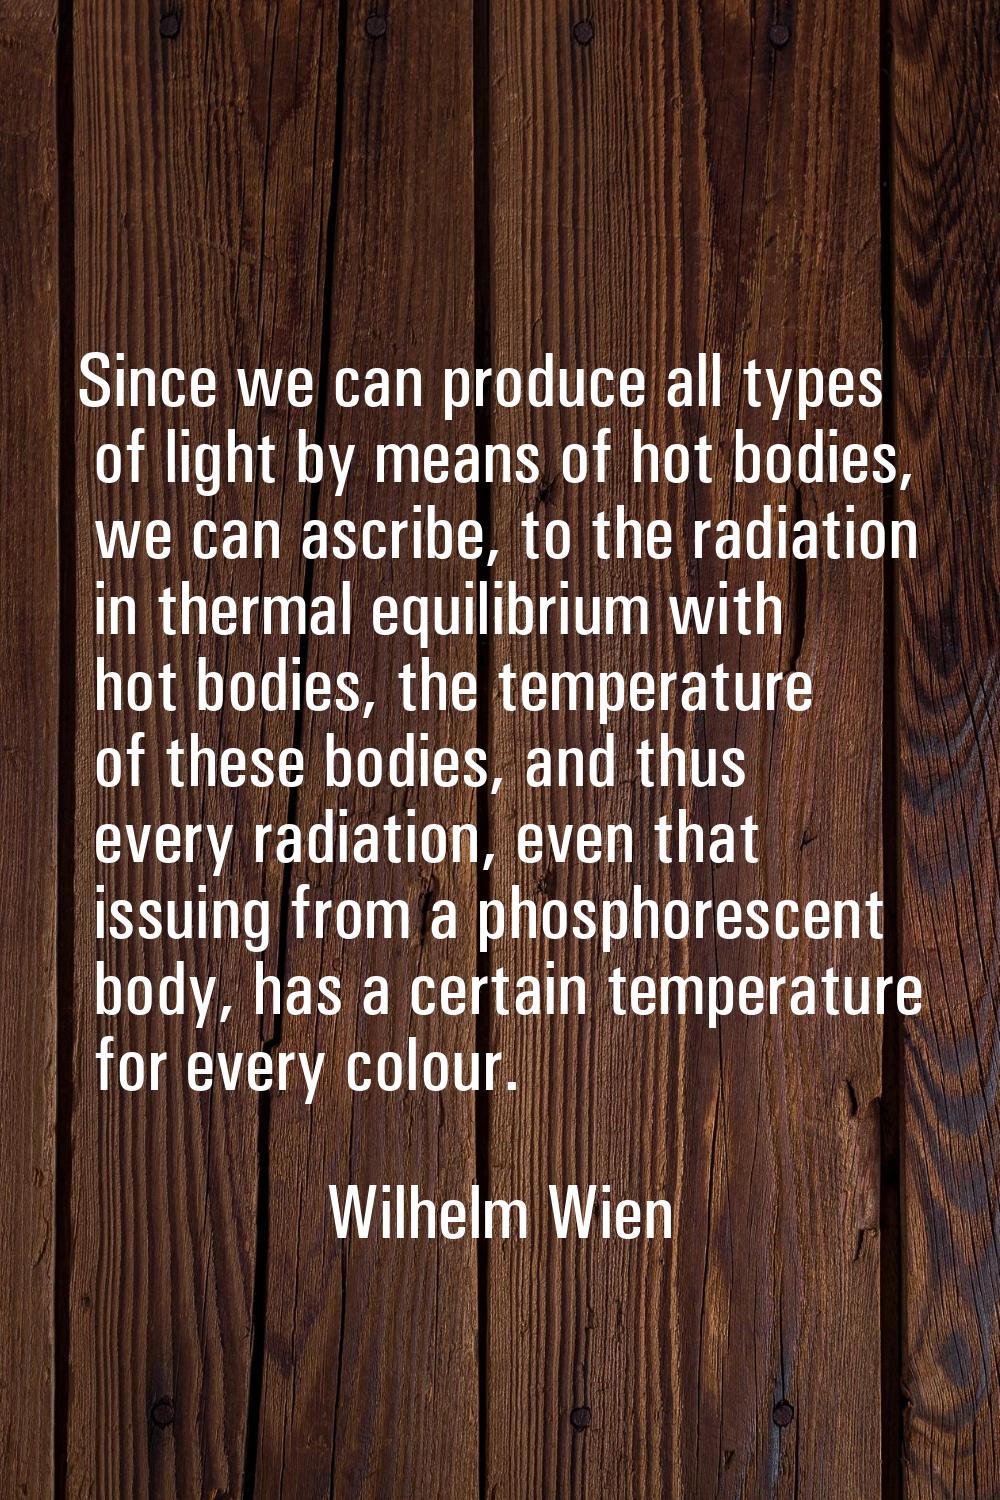 Since we can produce all types of light by means of hot bodies, we can ascribe, to the radiation in